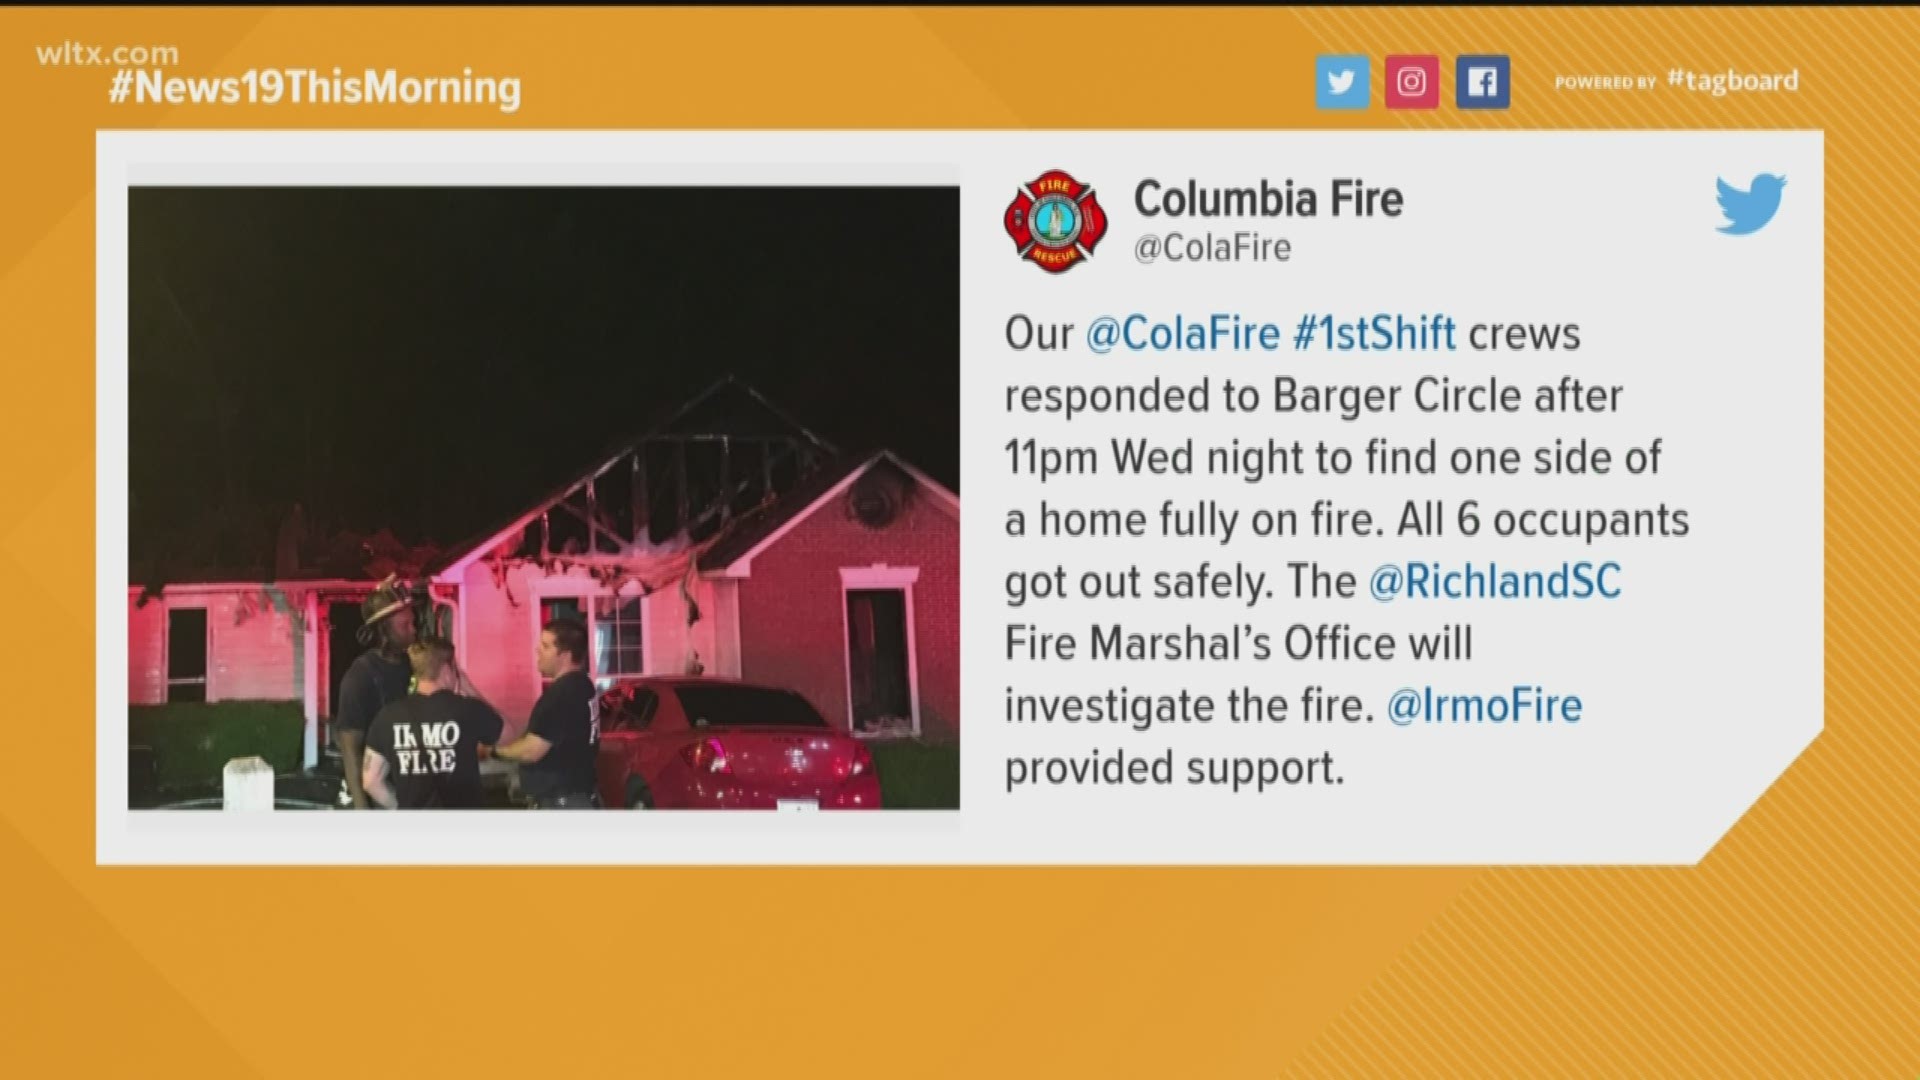 Columbia Fire tweeted that crews were called out to a house fire on Barger Circle late Wednesday night. Irmo Fire was also called in for support.